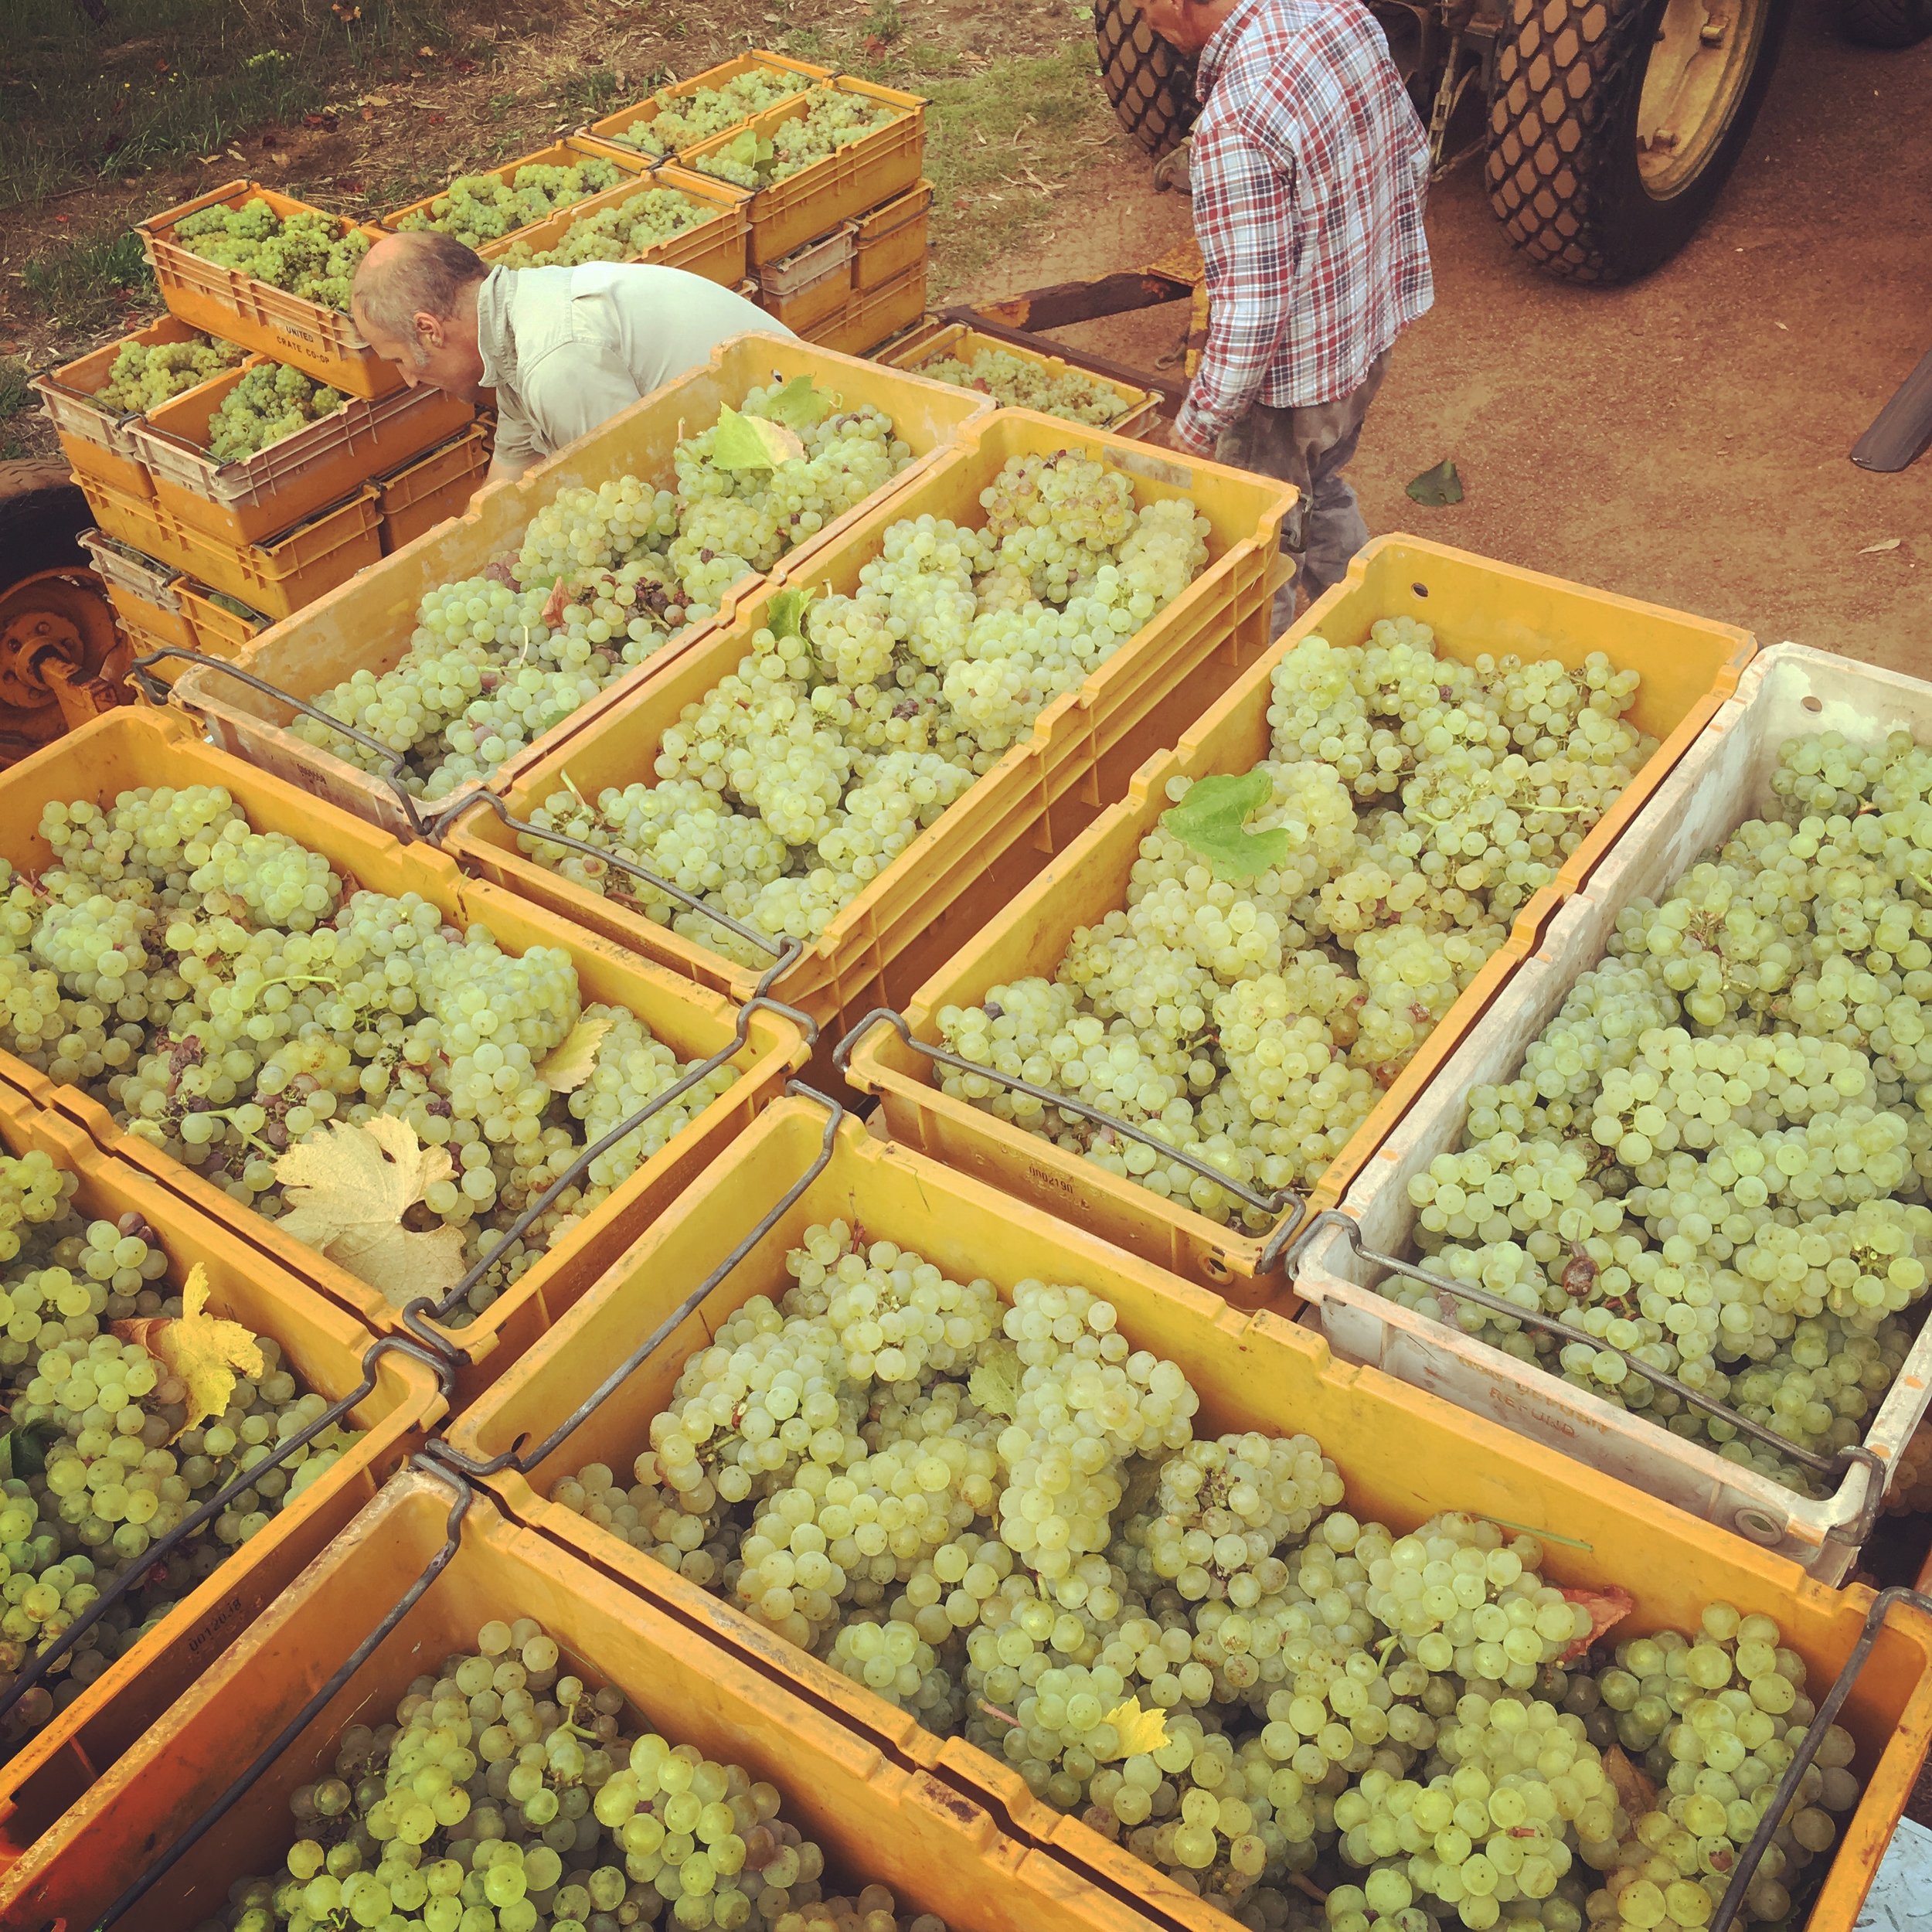 Whole bunch picked chardonnay grapes...